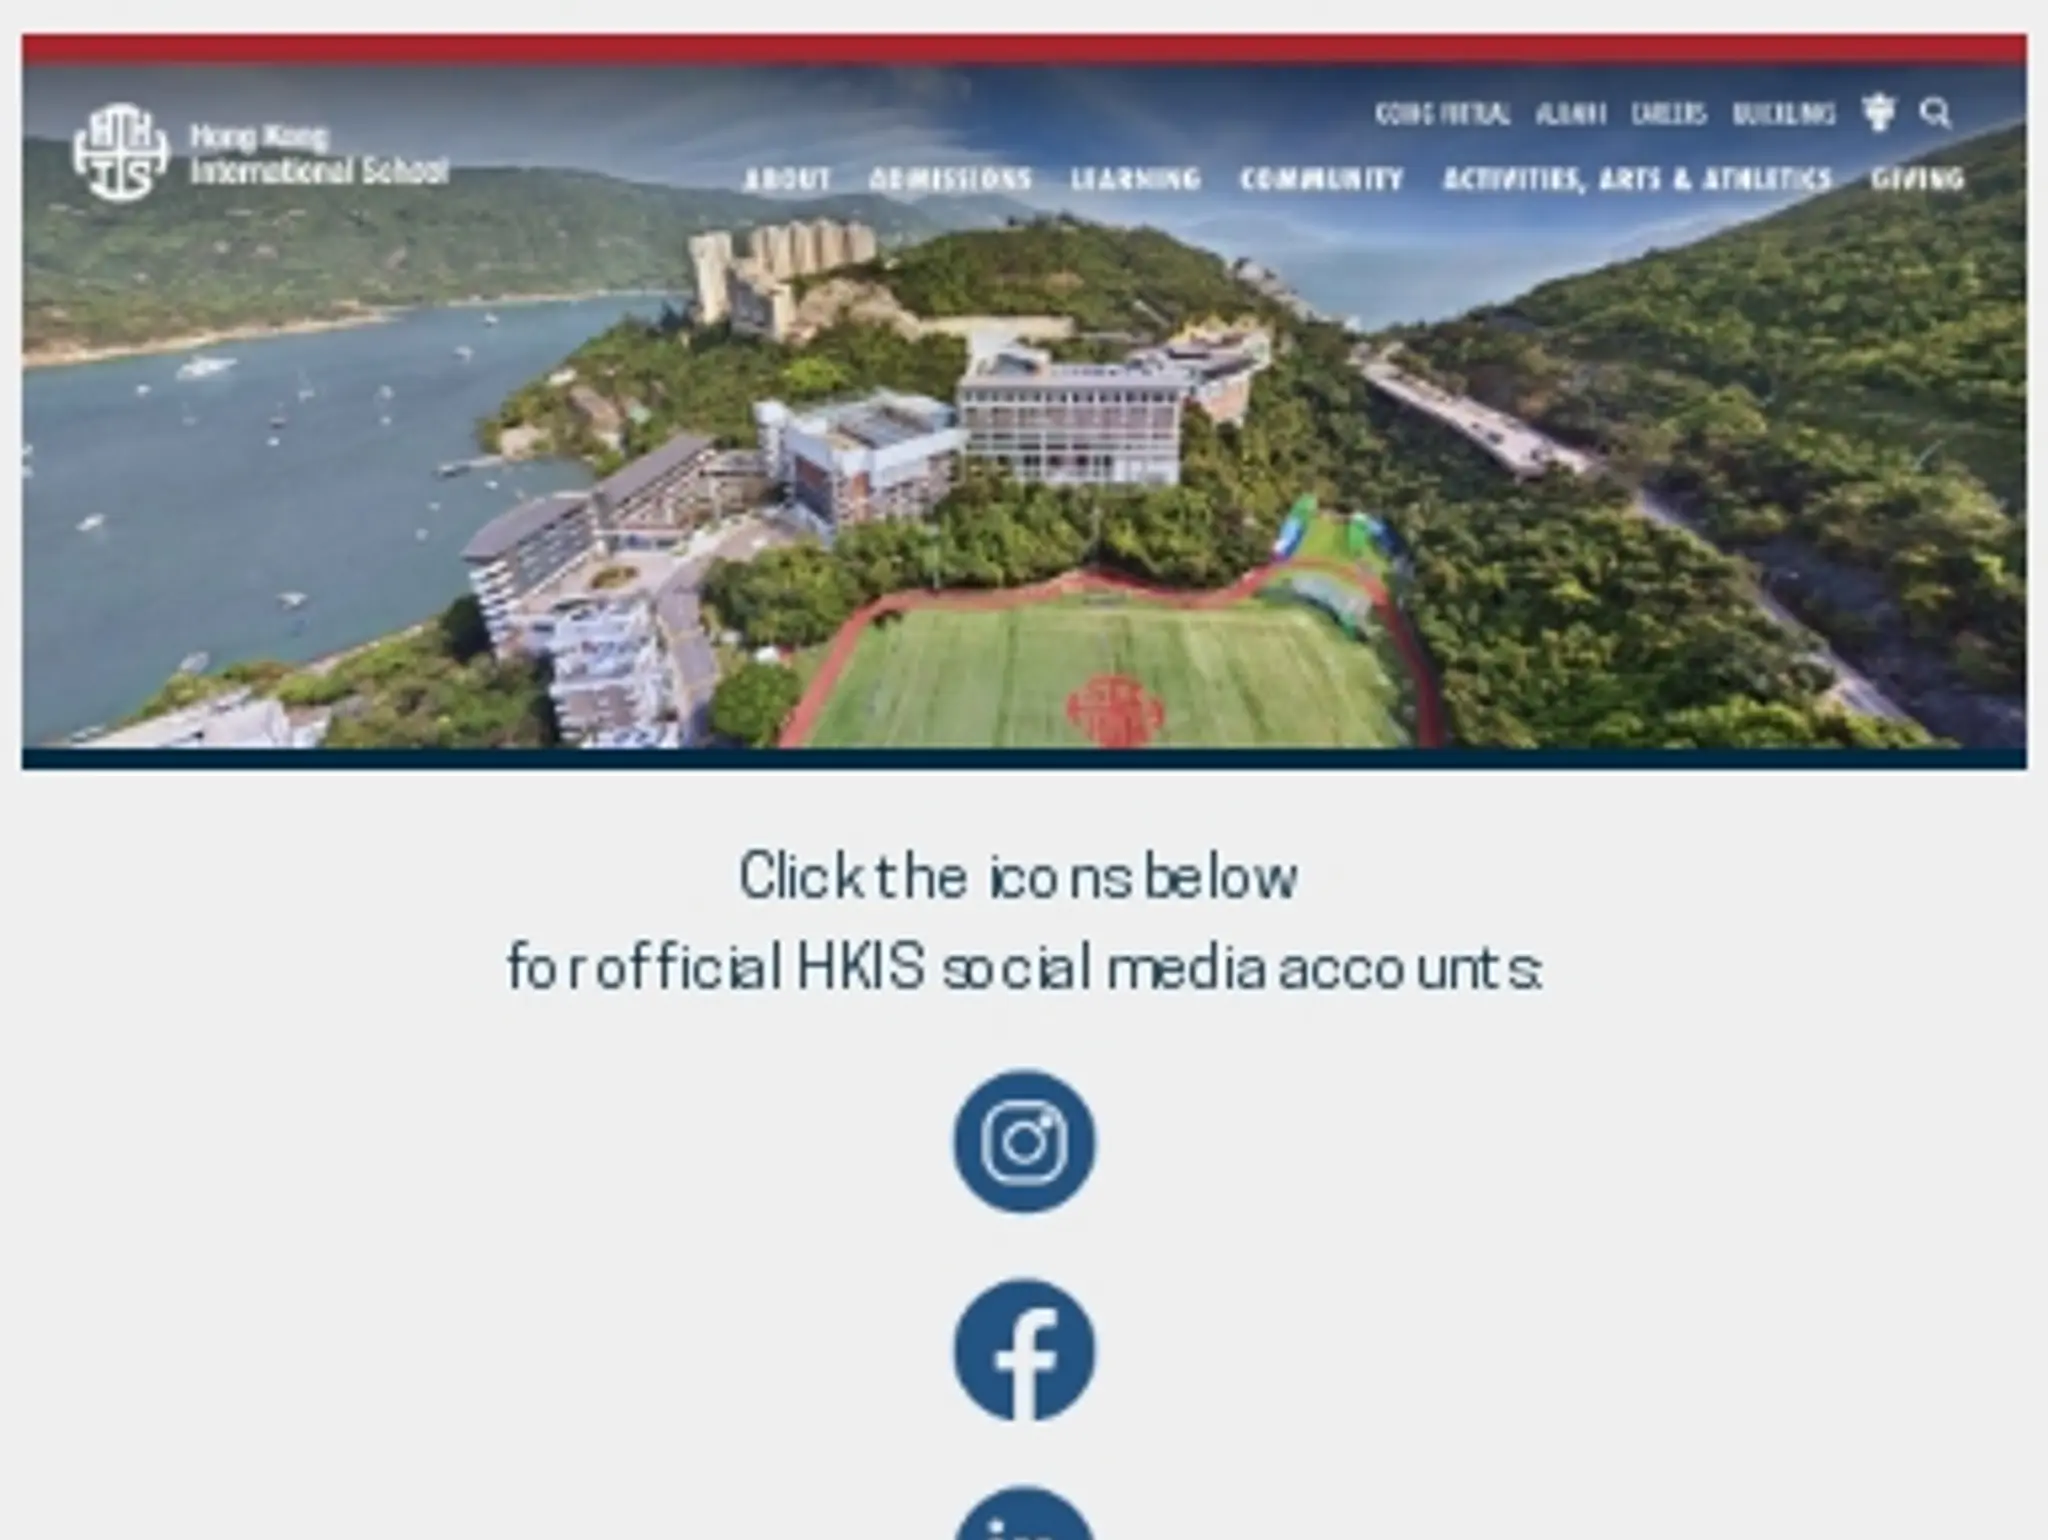 Stay Engaged with HKIS